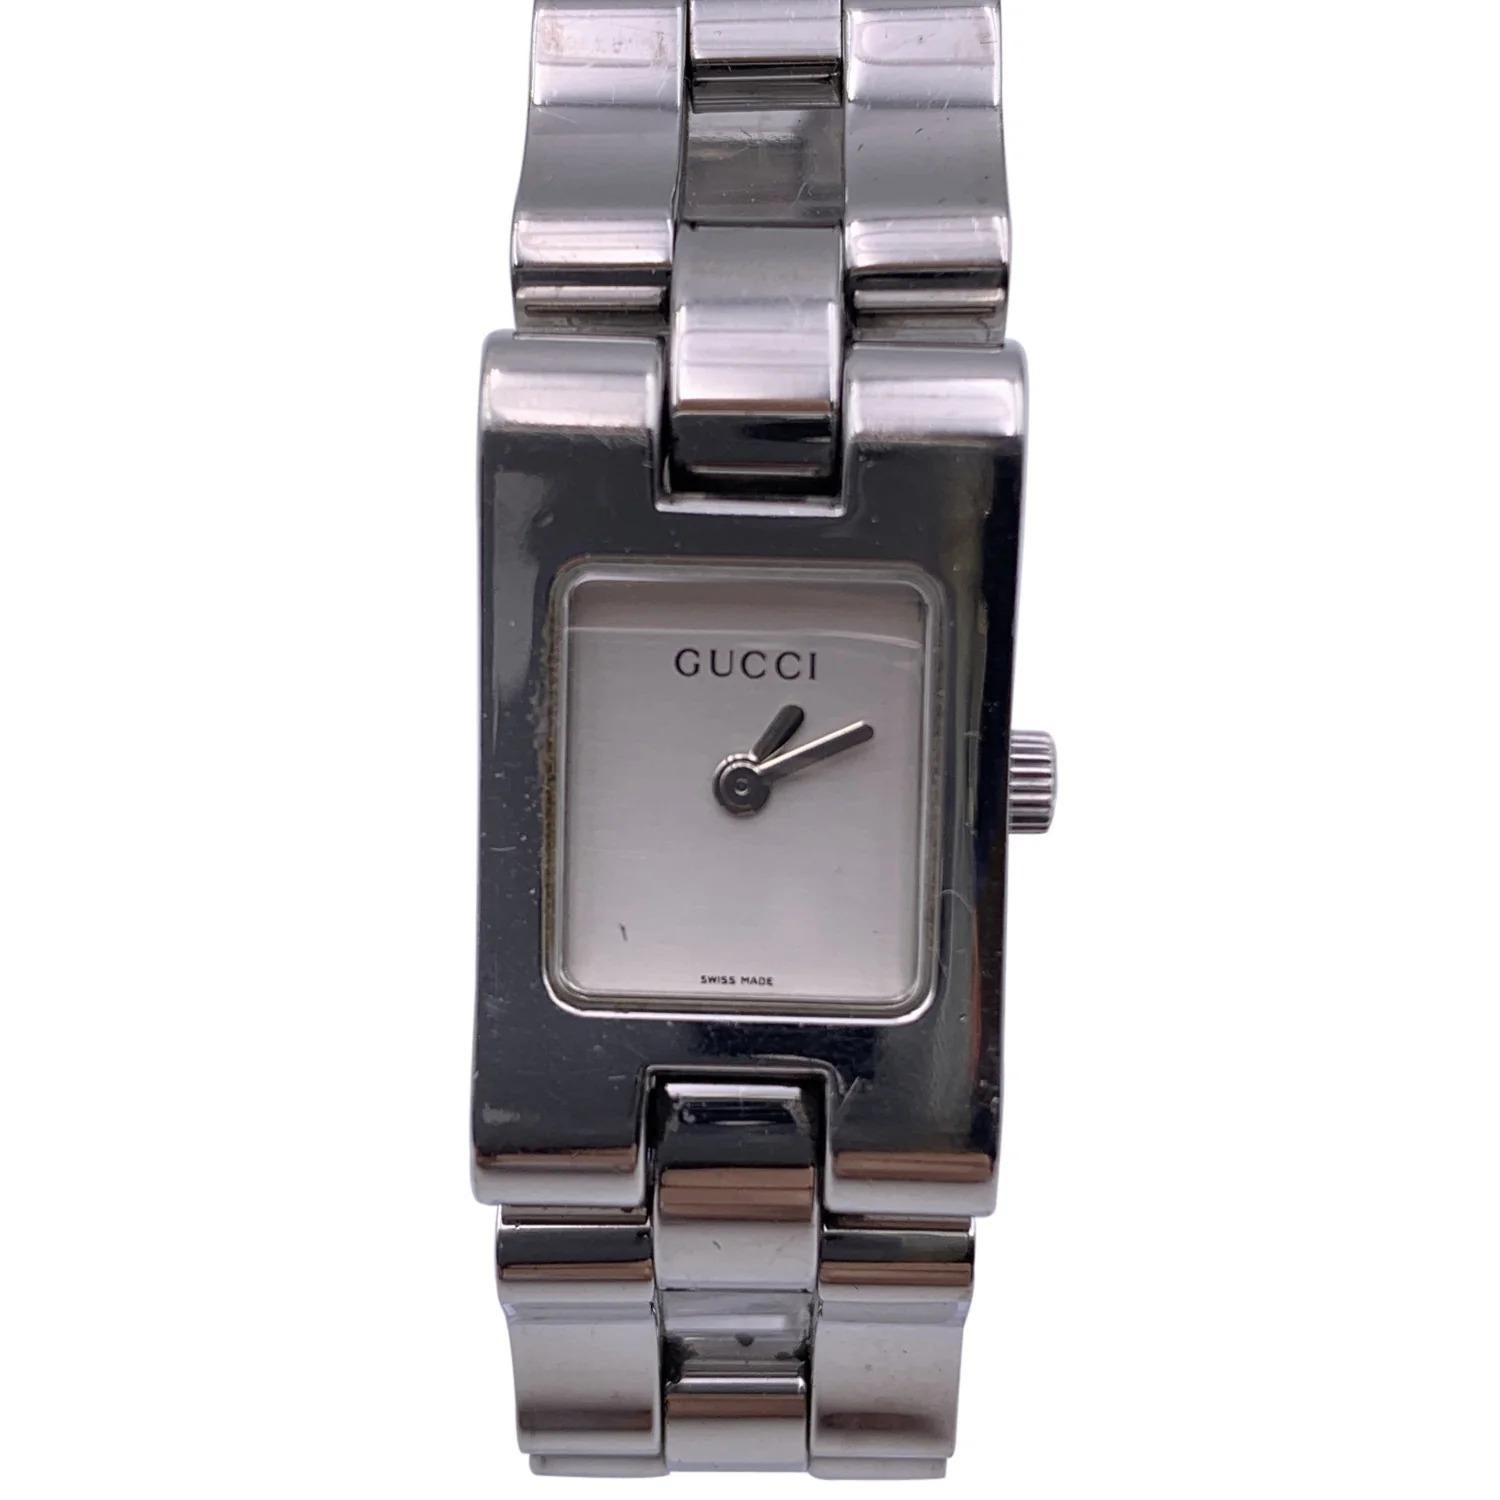 Gucci 2305L stainless steel wrist watch. Stainless steel case (Approximately 28 mm x 17 mm). White Dial and Sapphire crystal. Swiss Made Quartz movement. Gucci written on face, clasp & reverse.Water Resistant to 3atm. Deployant Clasp. Swiss Made.